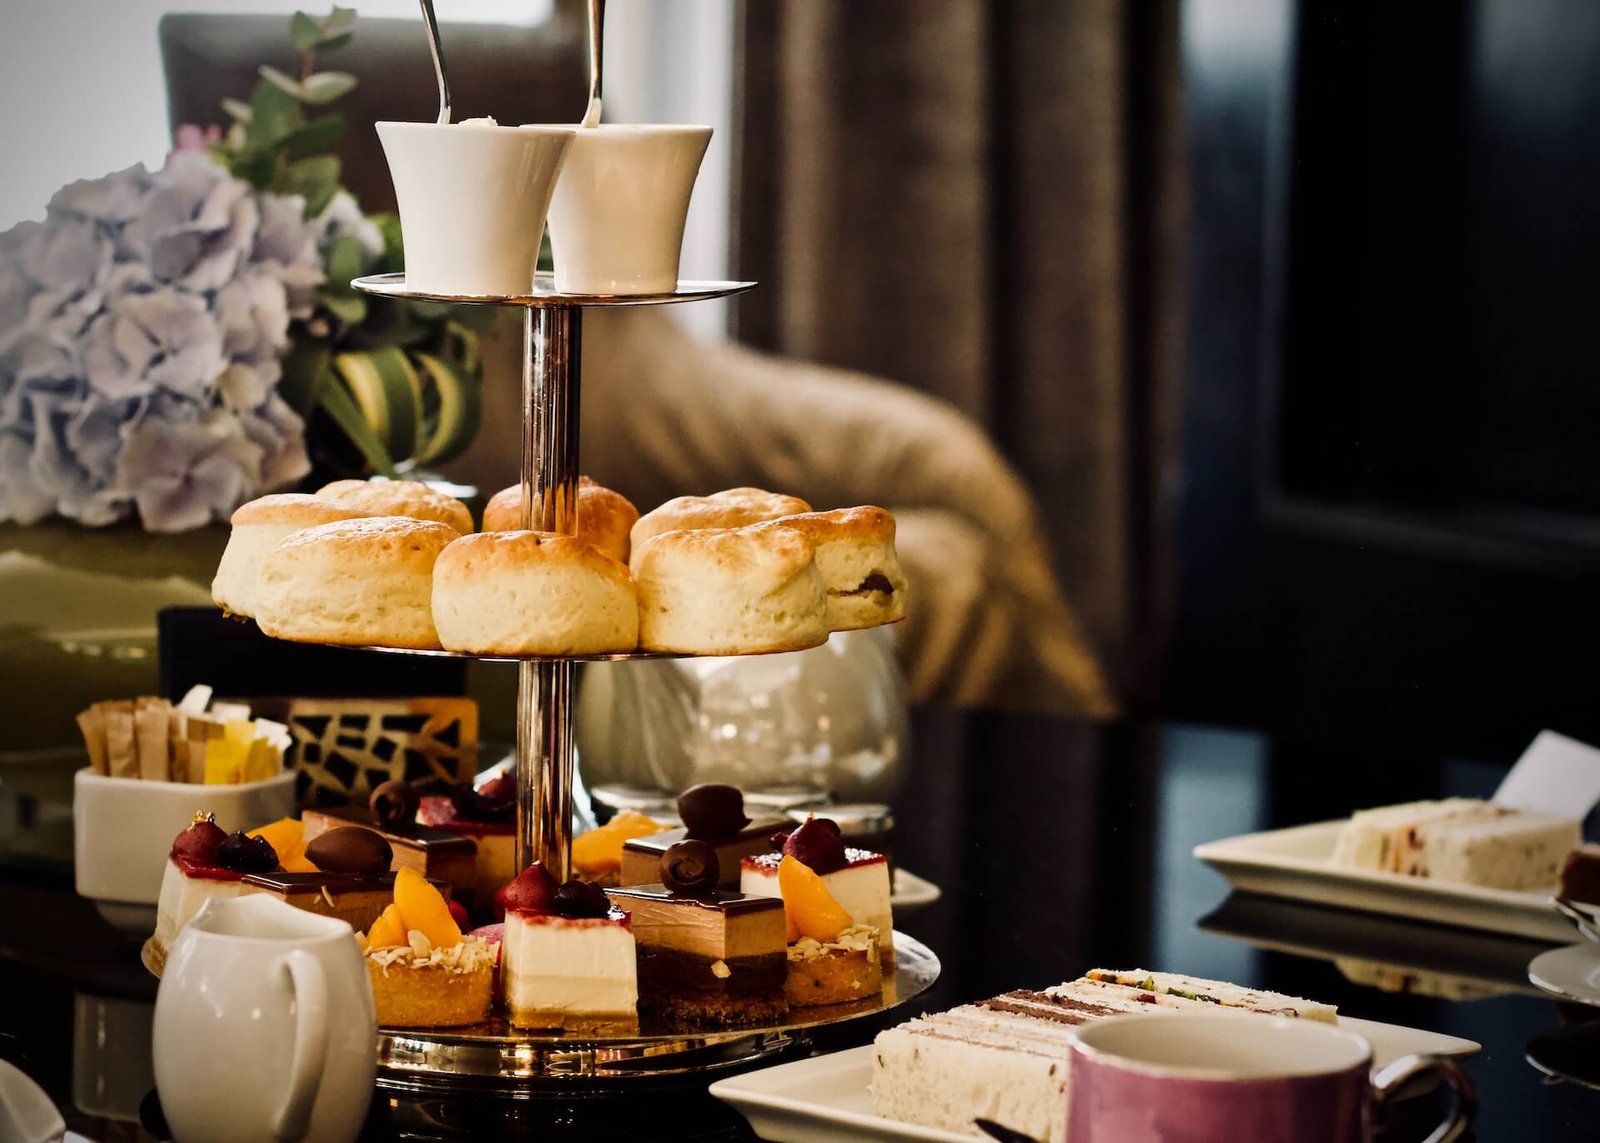 Afternoon Tea in Norwich – Where to find tasty offers and deals.